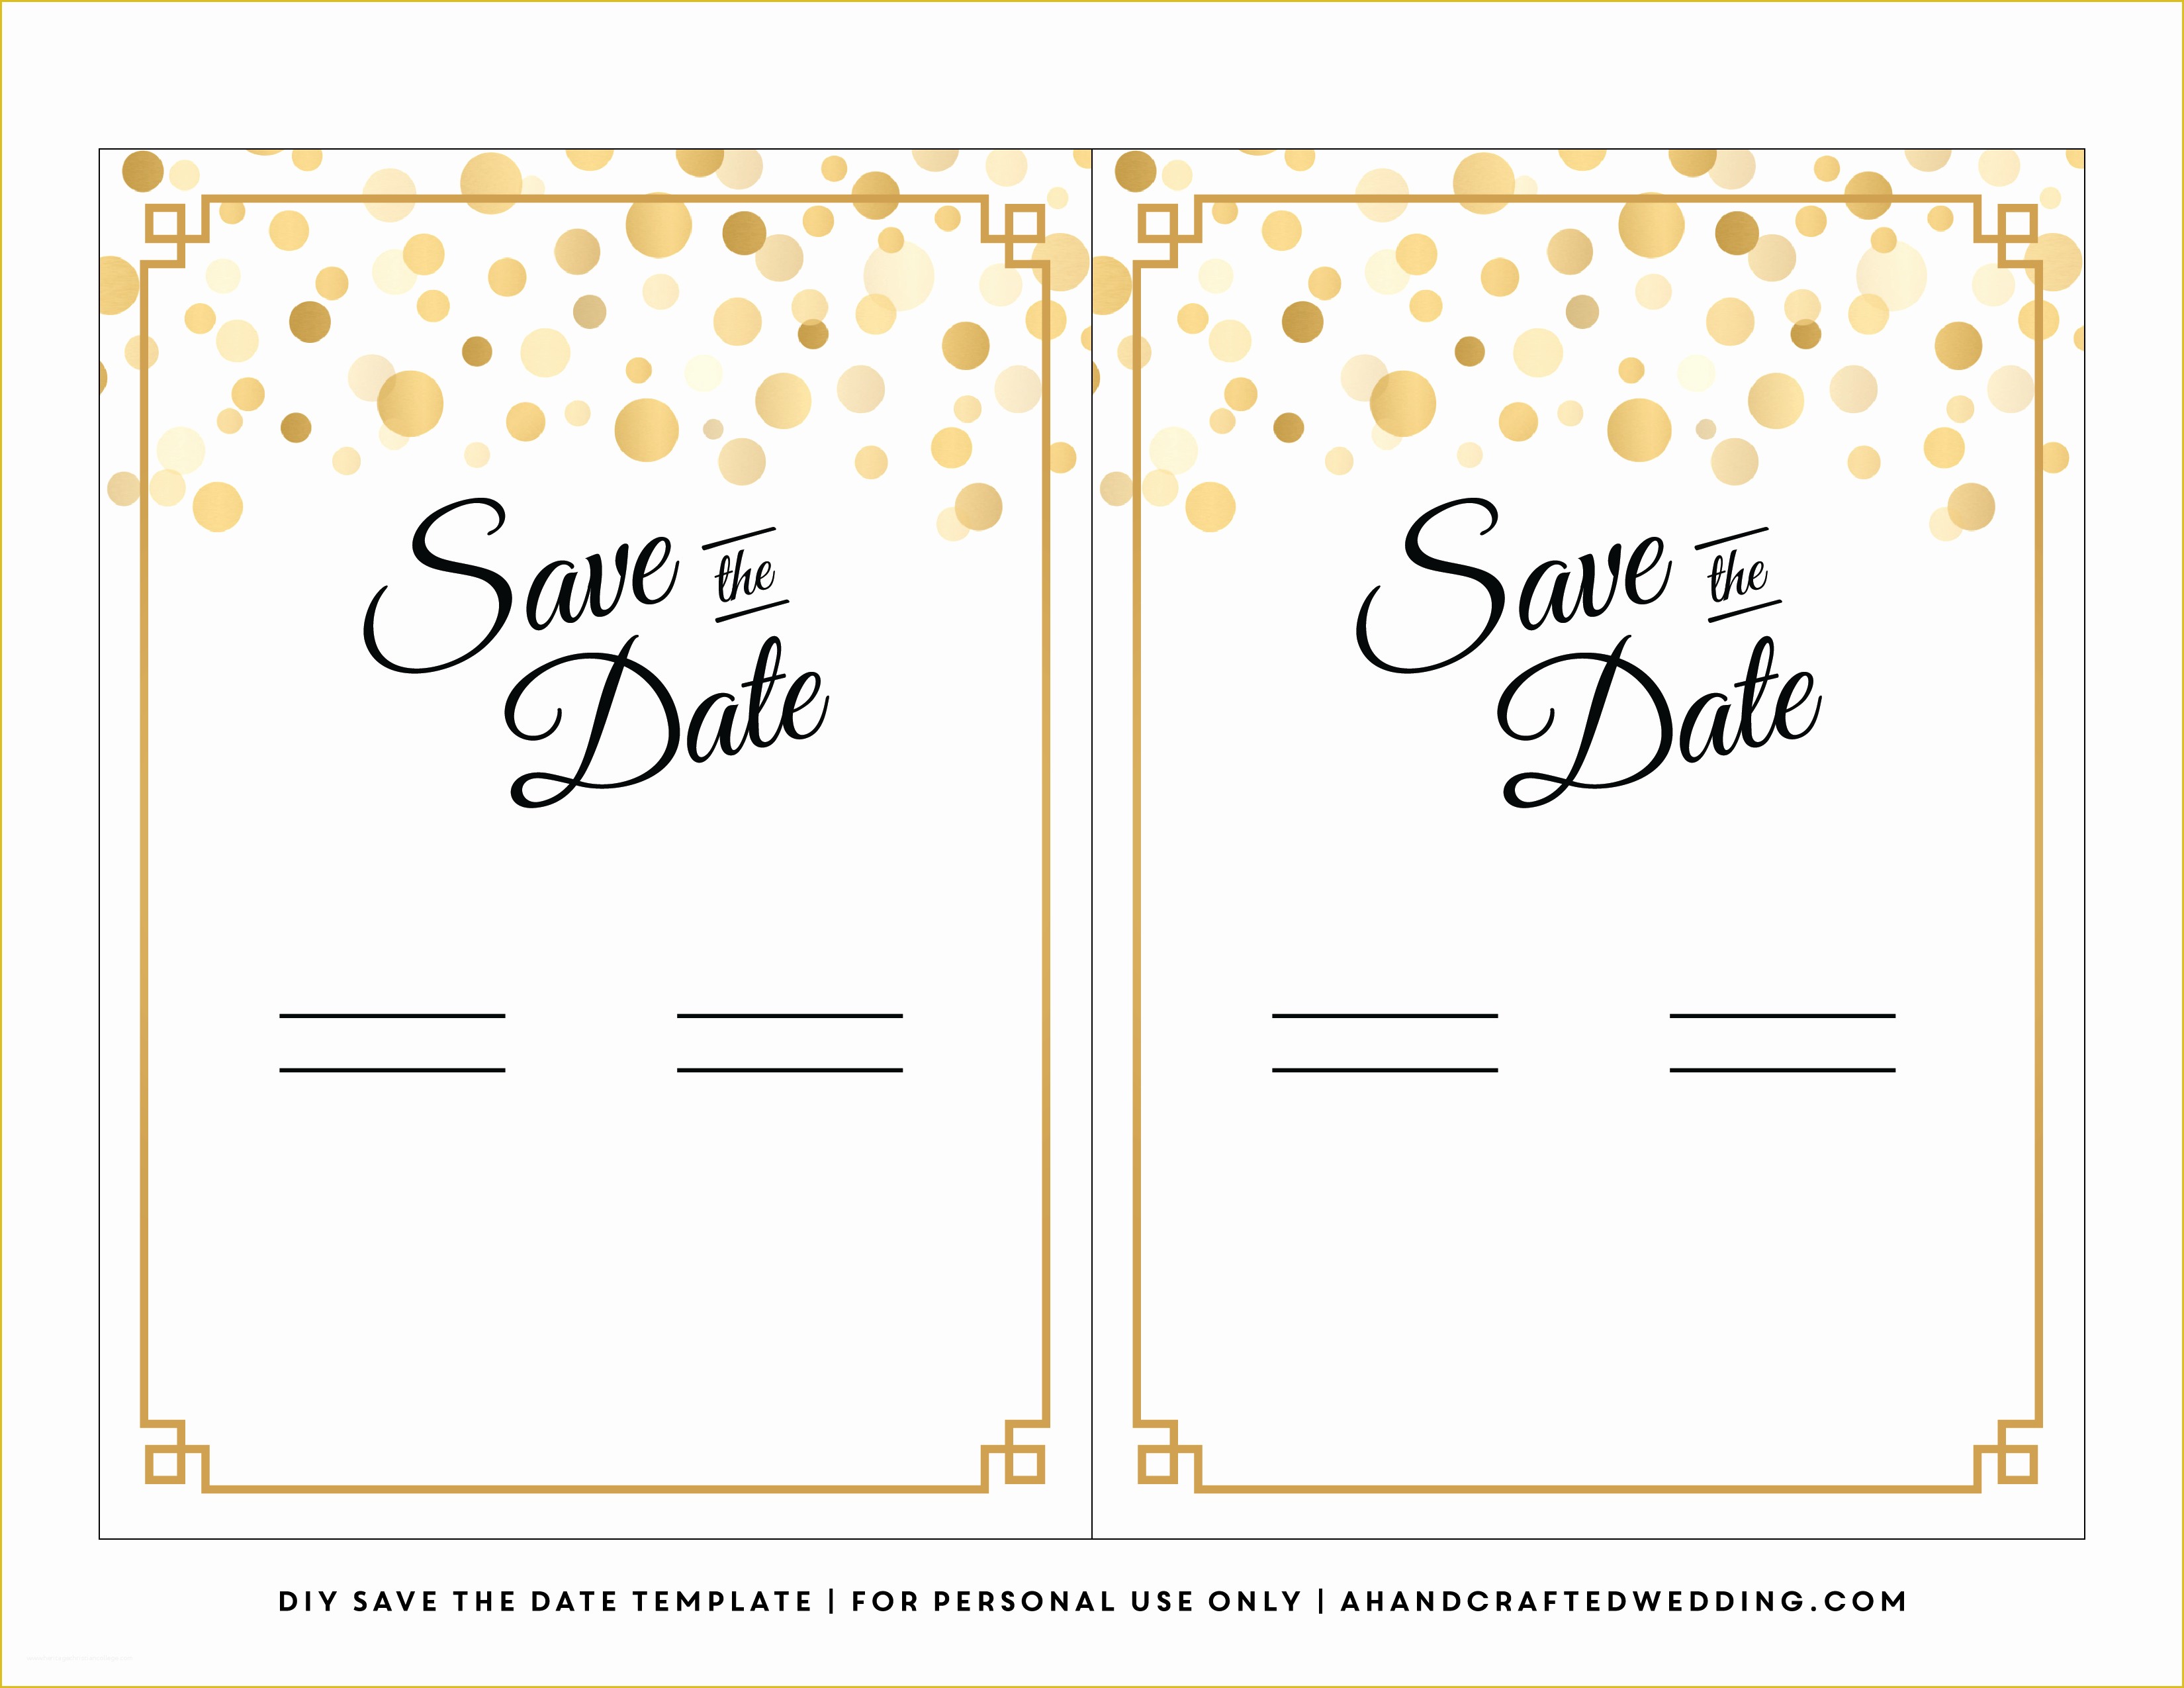 Free Save the Date Templates Of 7 Best Of Diy Save the Date Template Halloween